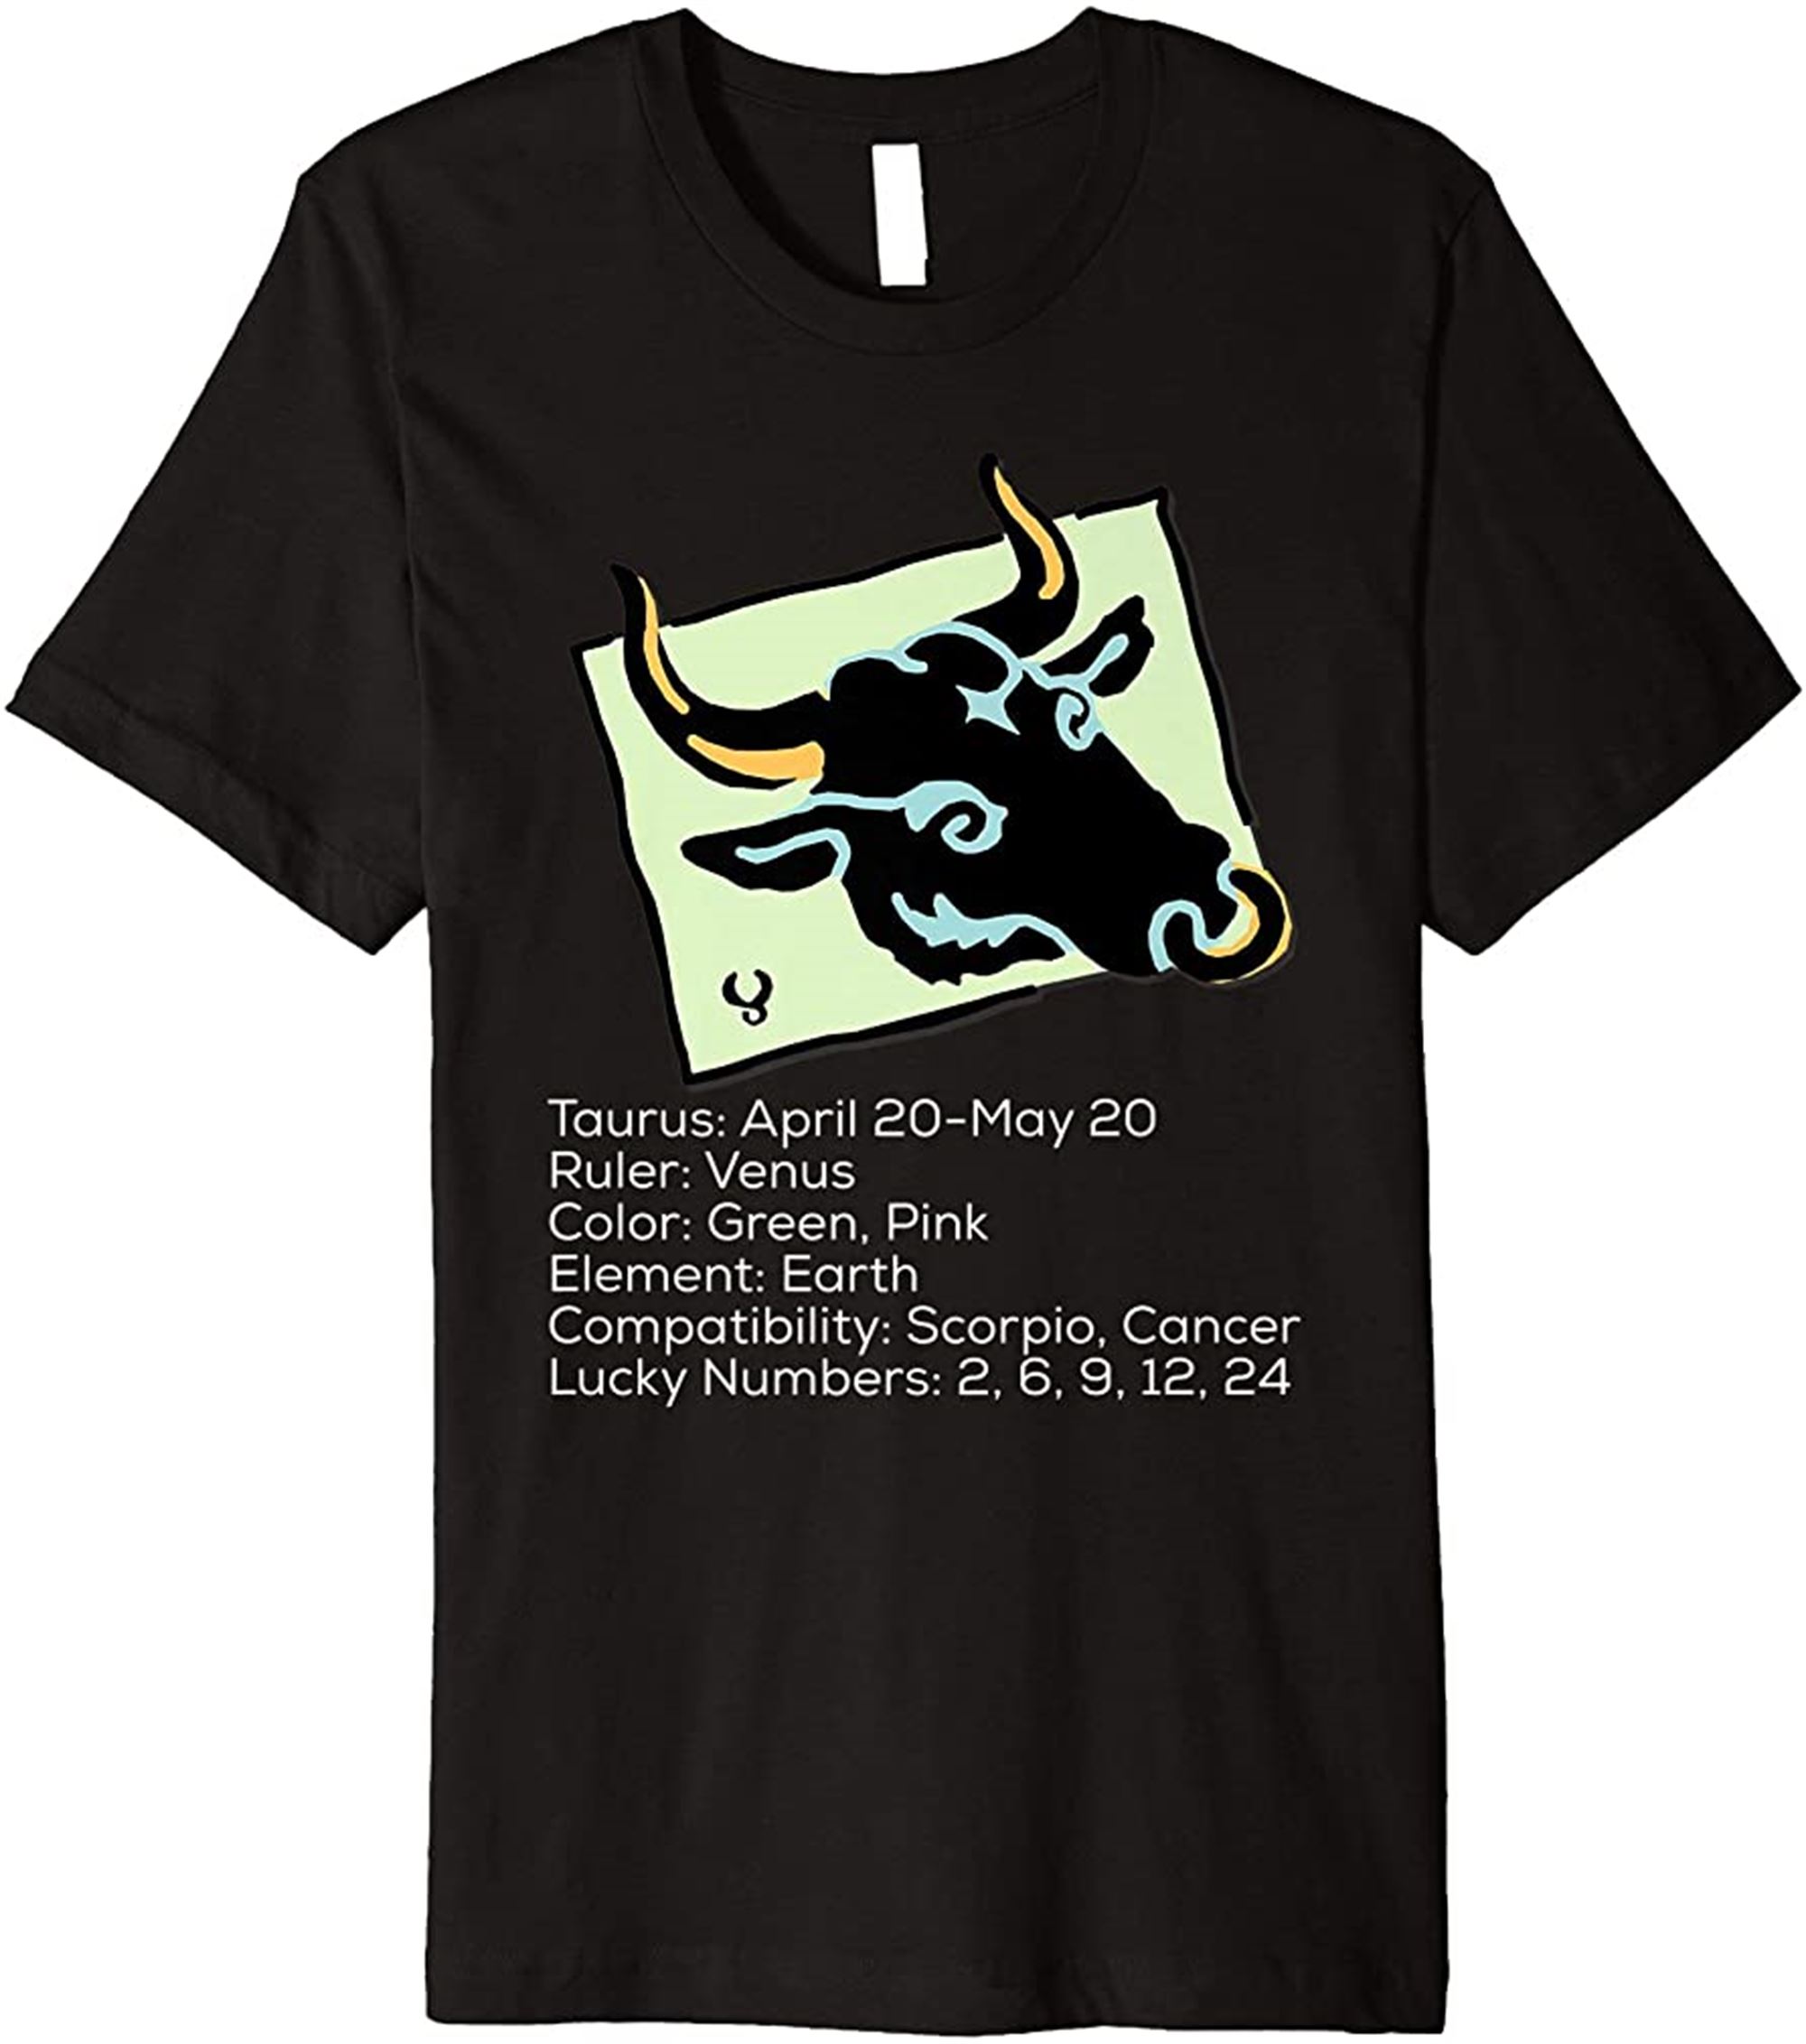 Taurus The Bull April 20 To May 20 Zodiac Sign Shirt Size Up To 5xl